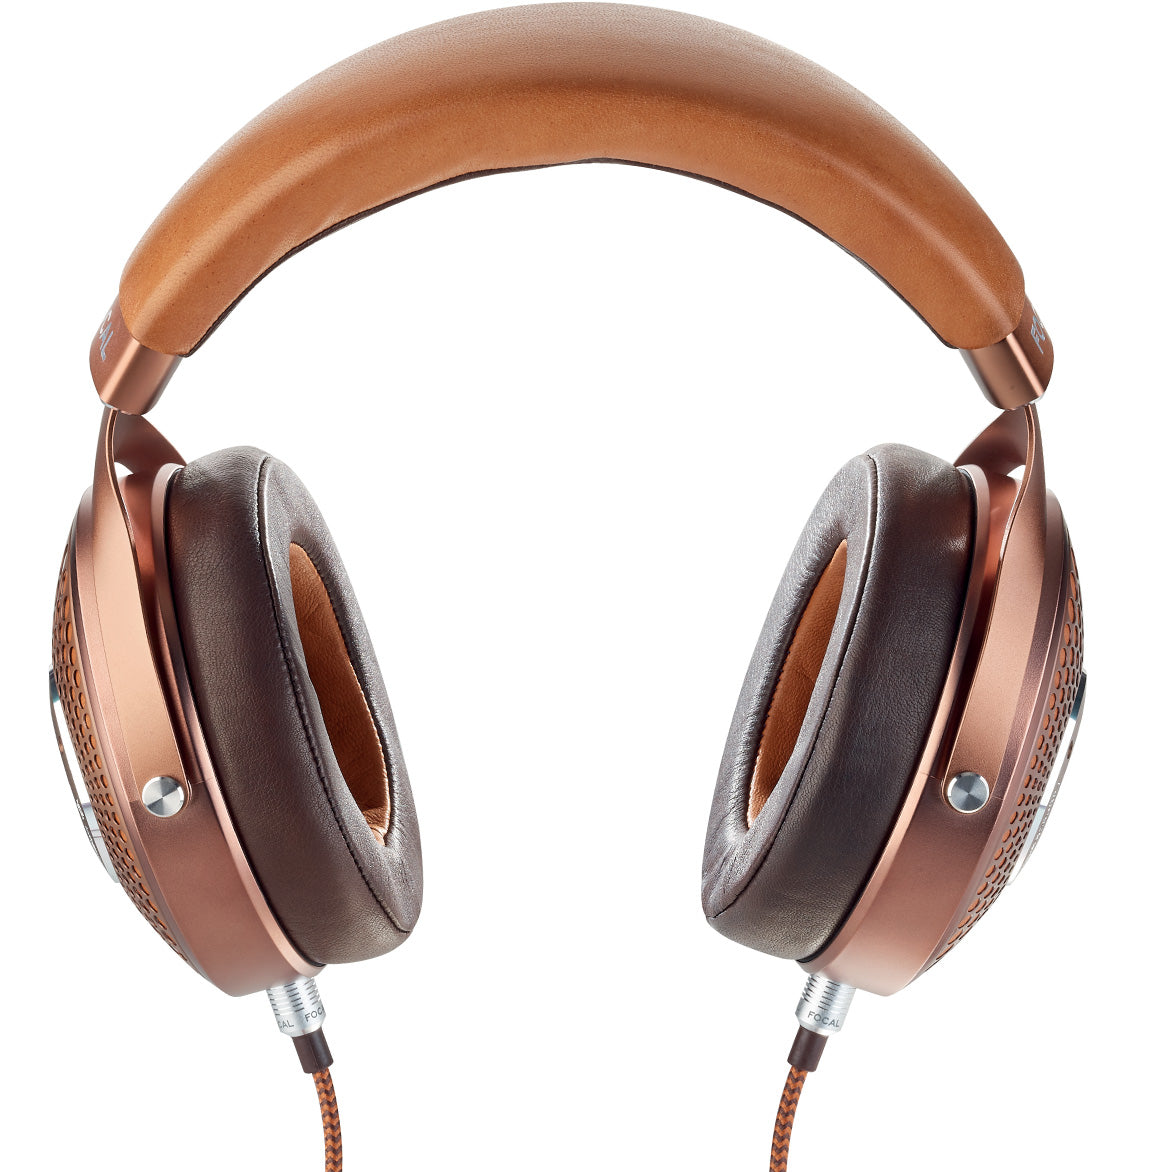 FOCAL STELLIA HEADPHONE - Best price for all Focal Headphones available at vinylsound.ca FOCAL UTOPIA 2020 HEADPHONE - FOCAL CLEAR MG HEADPHONE - FOCAL STELLIA HEADPHONE - FOCAL CELESTEE HEADPHONE - FOCAL LISTEN WIRELESS HEADPHONE - FOCAL SPHEAR WIRELESS HEADPHONE…